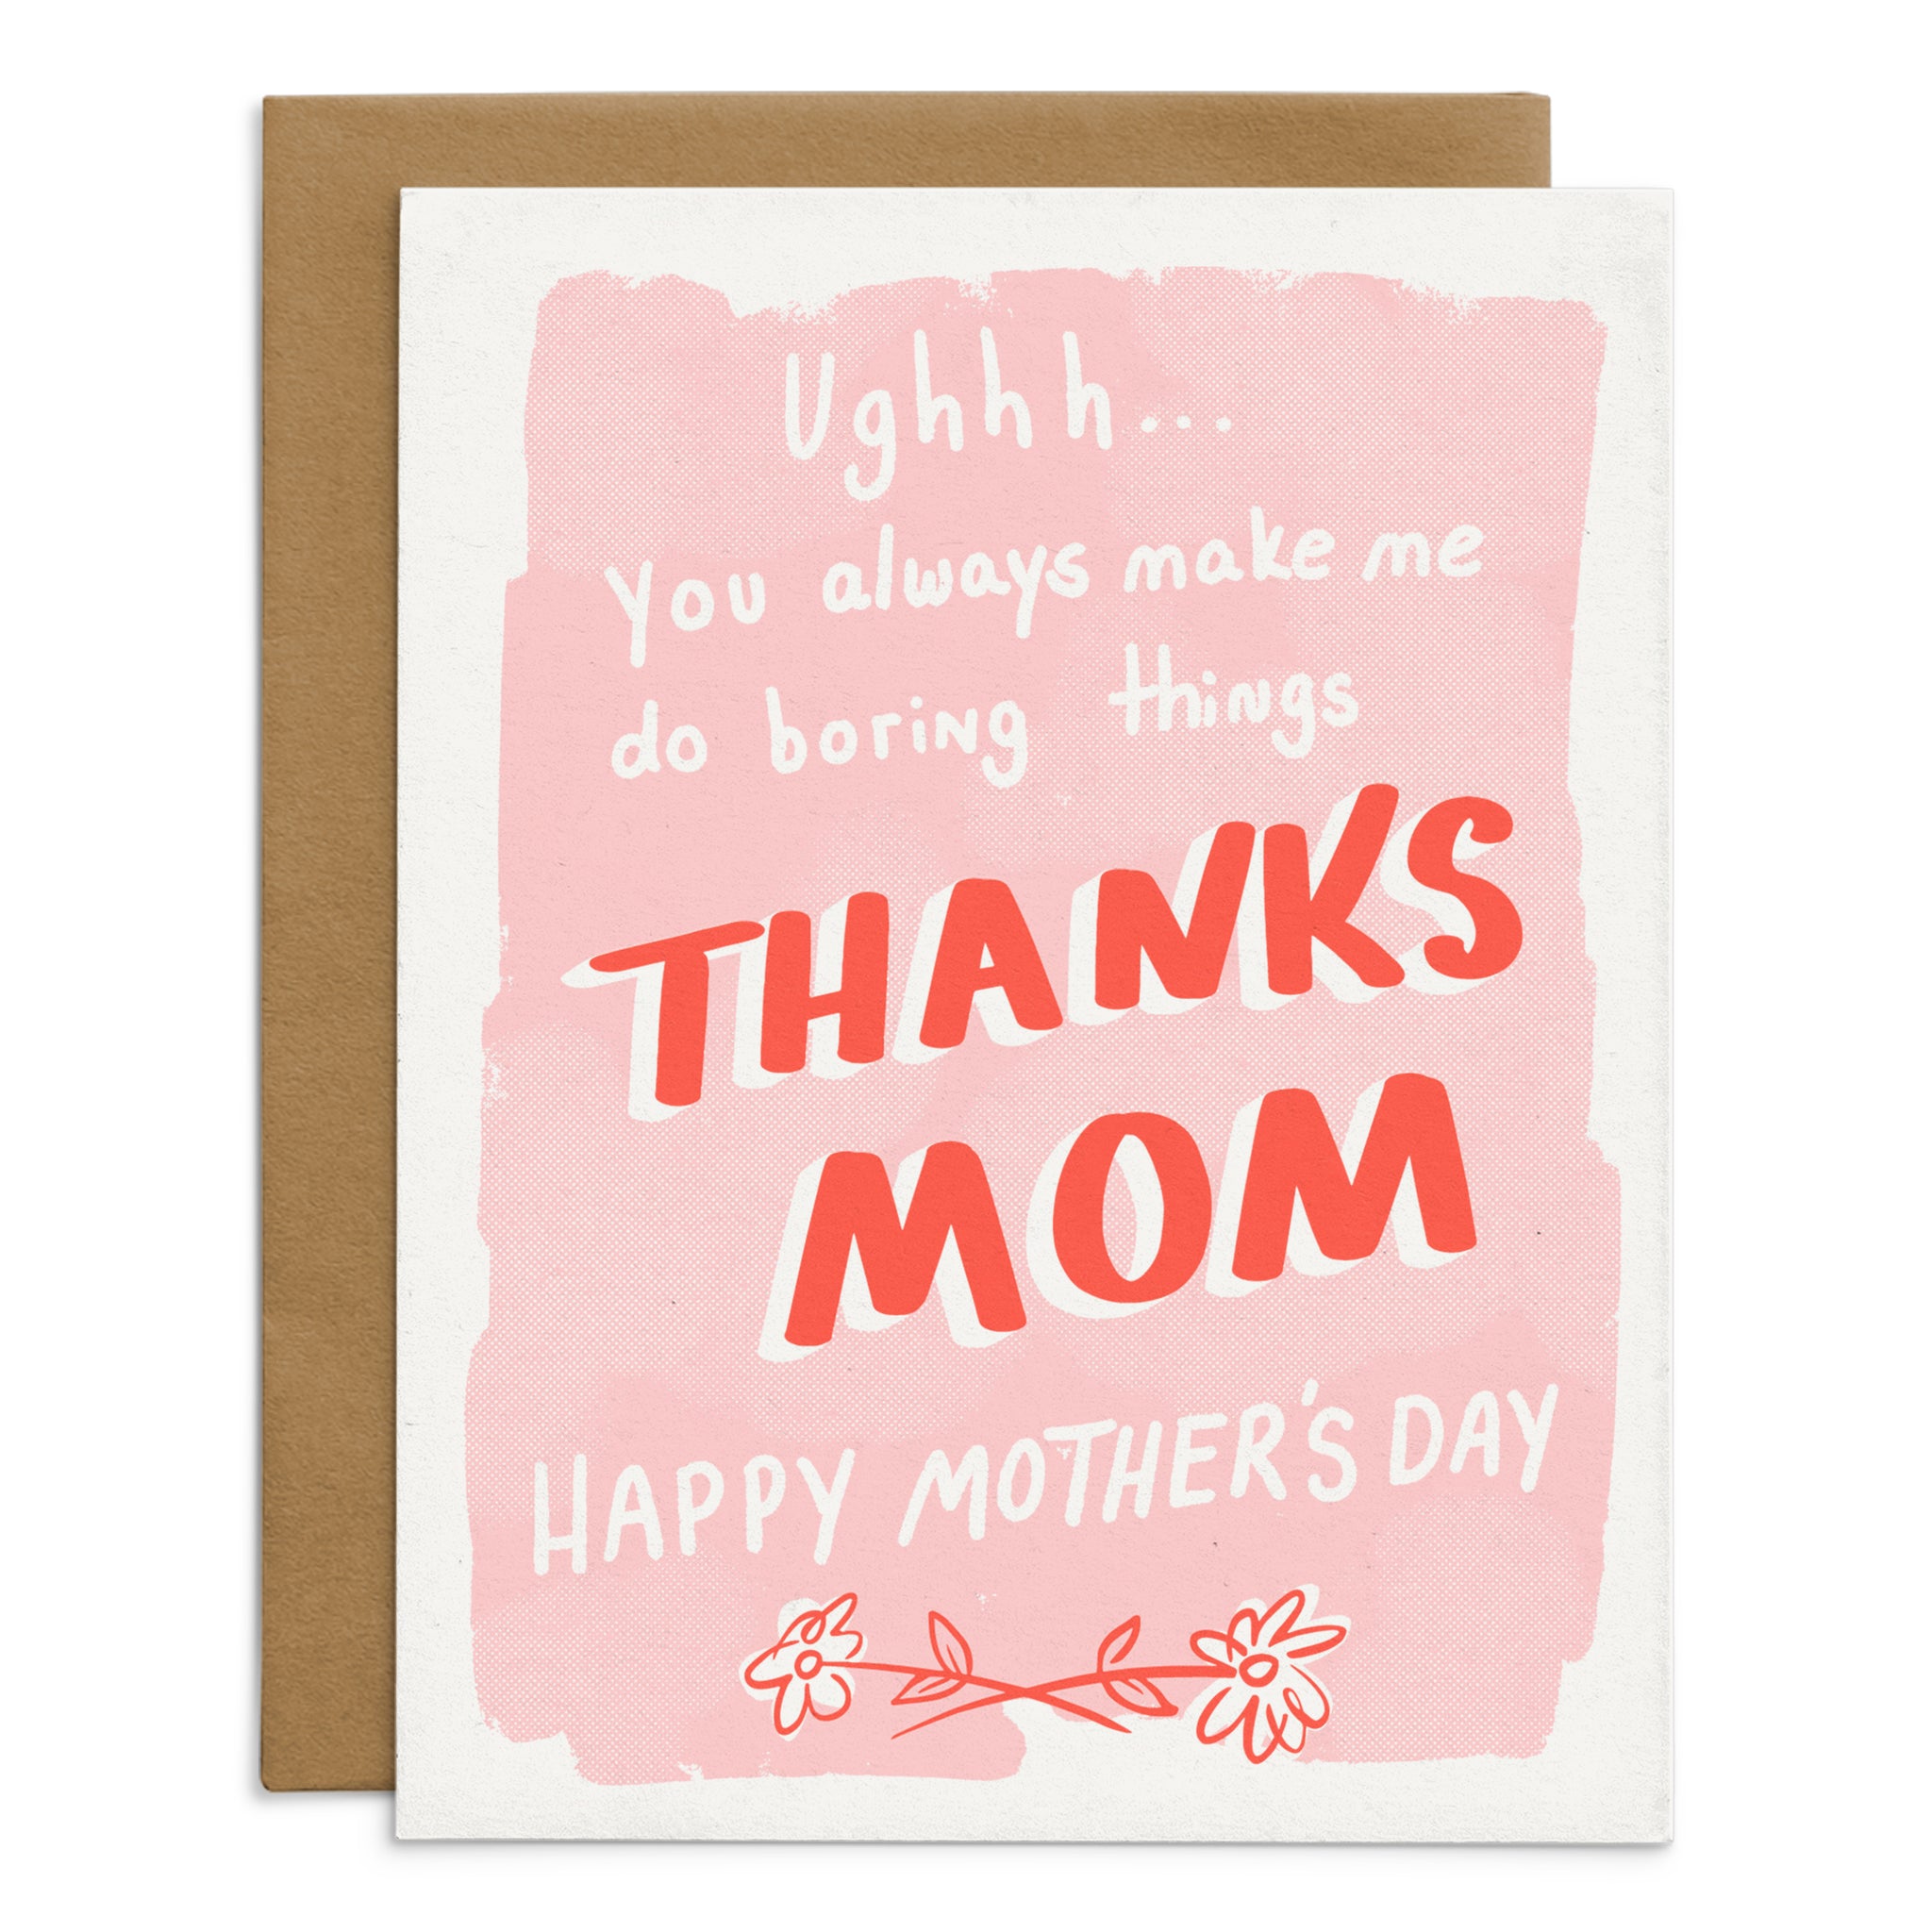 Ugh, Thanks Mom Happy Mother's Day Card